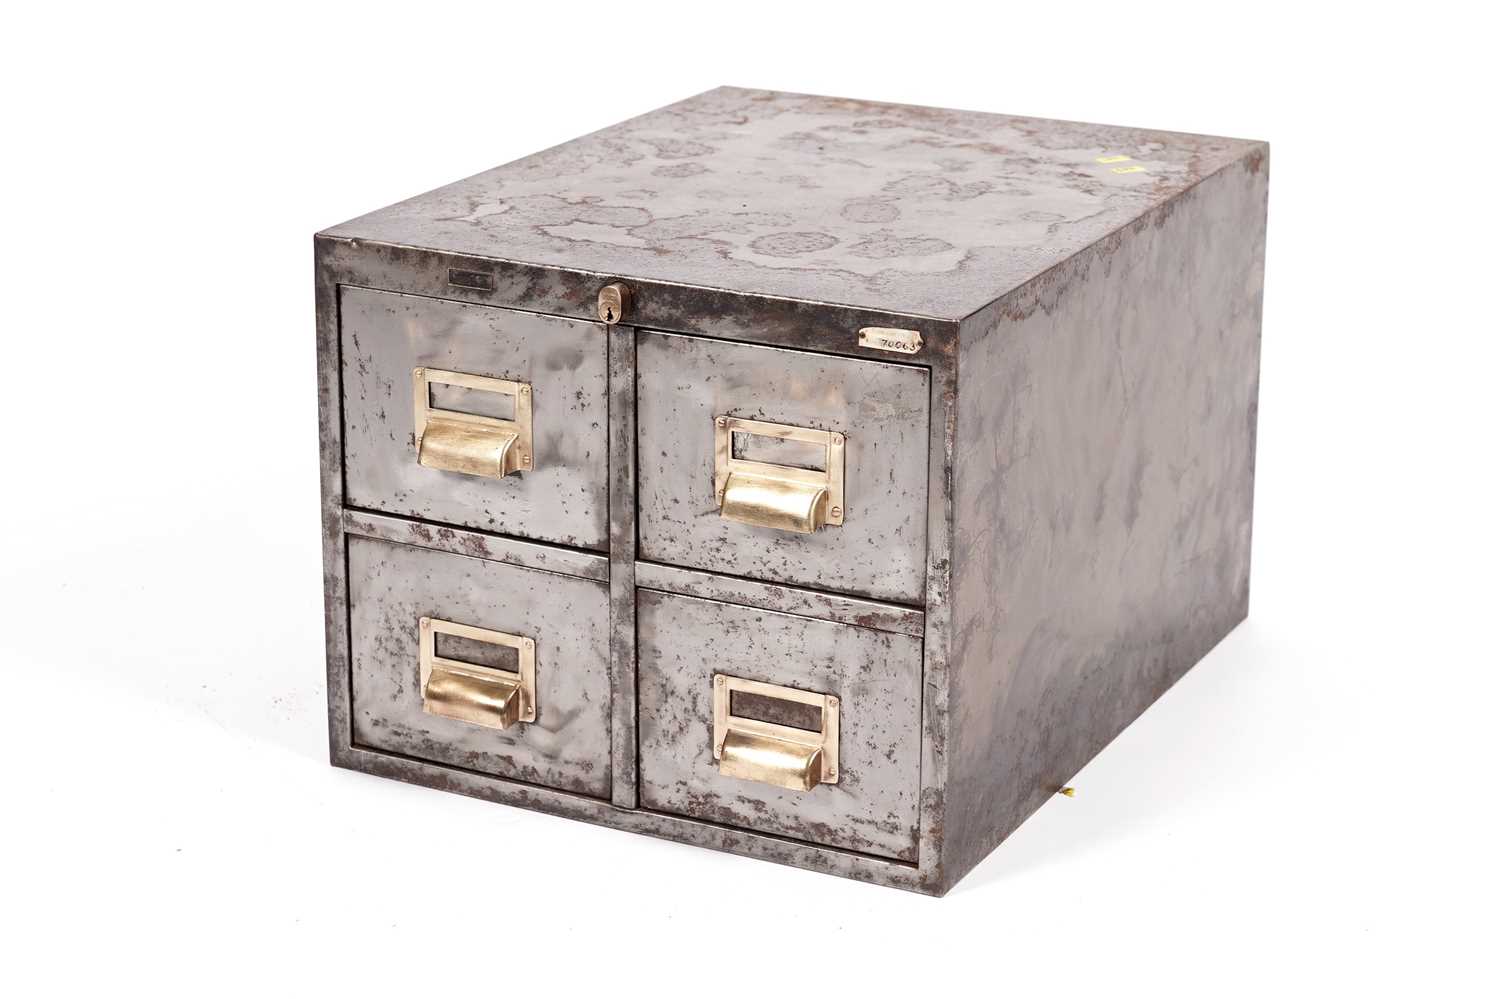 Lot 68 - A polished steel industrial index filing cabinet